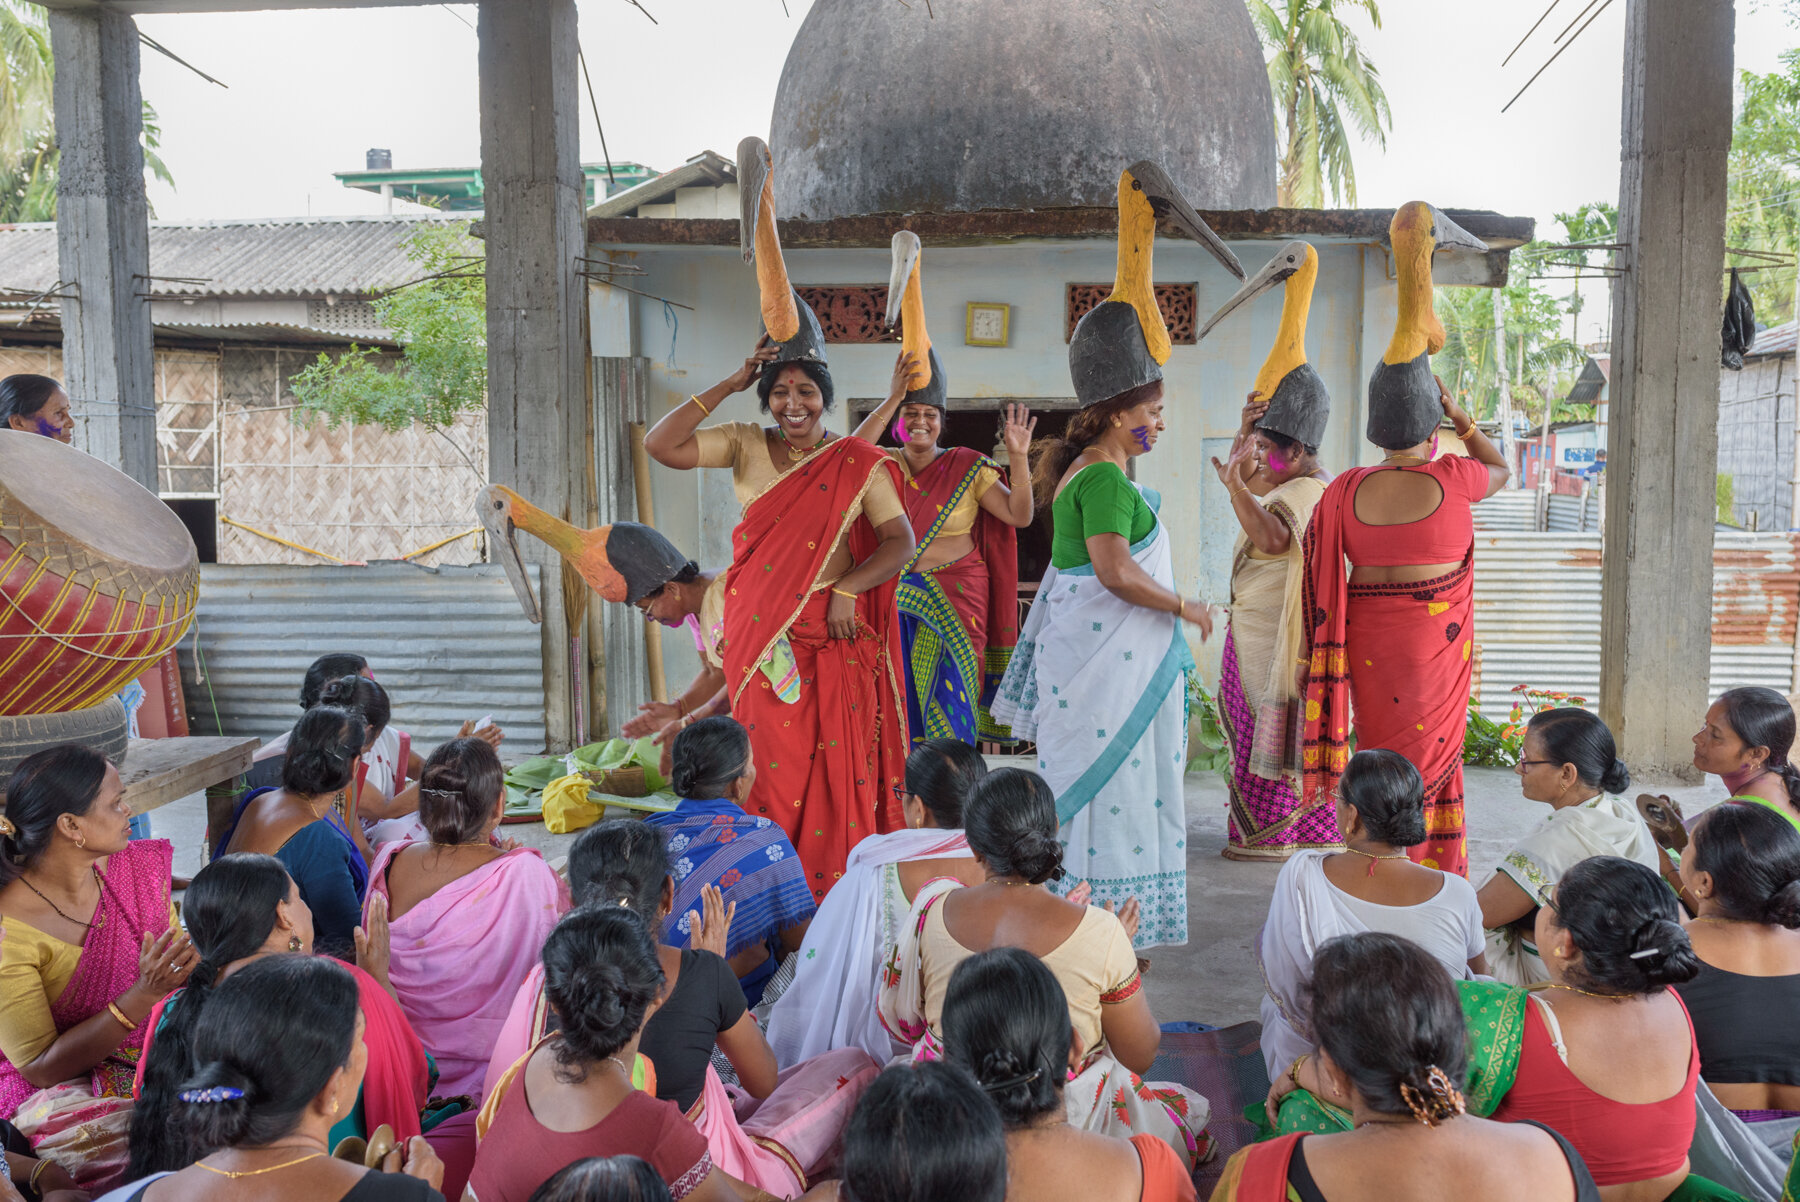  Members of the all-women Hargila Army dance wearing stork masks while some sing traditional songs at the baby shower for the greater adjutant storks at Dadara village, Assam, India. The baby shower according to the Assamese tradition is observed for